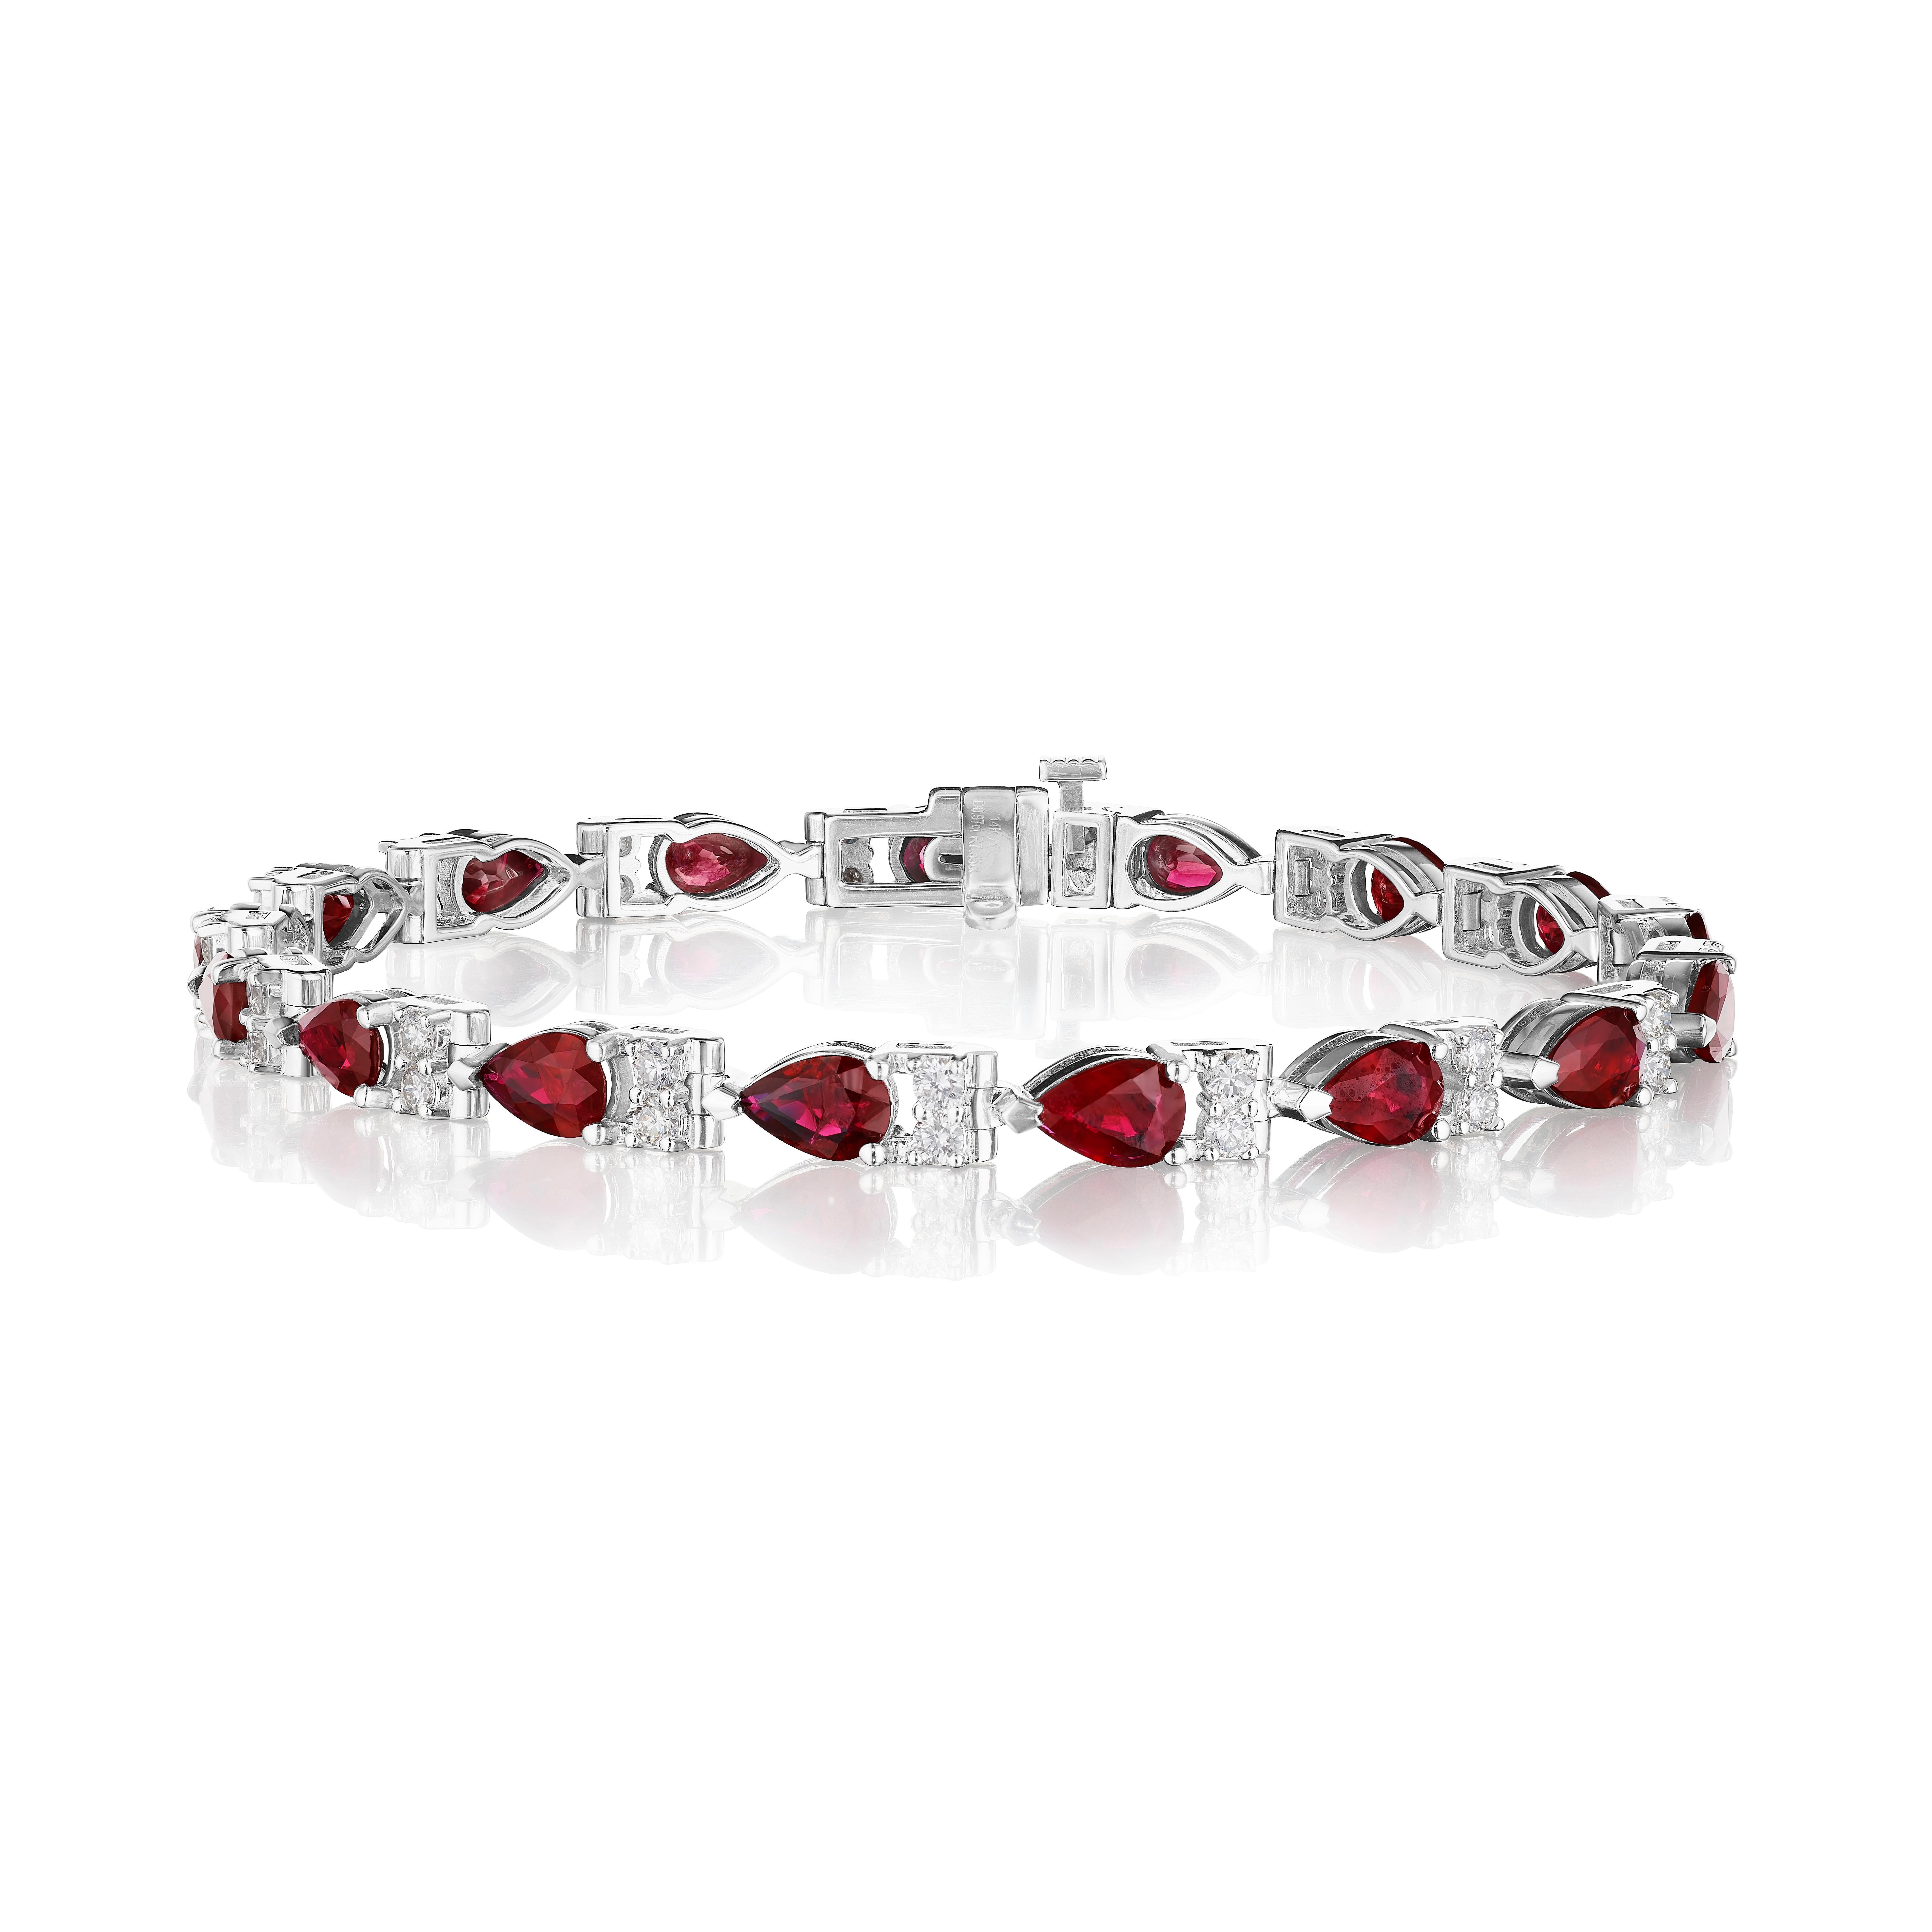 •	A beautiful row of red pear shape rubies and white round brilliant cut diamonds encircle the wrist in this bracelet, set in 14KT gold. The bracelet measures 7